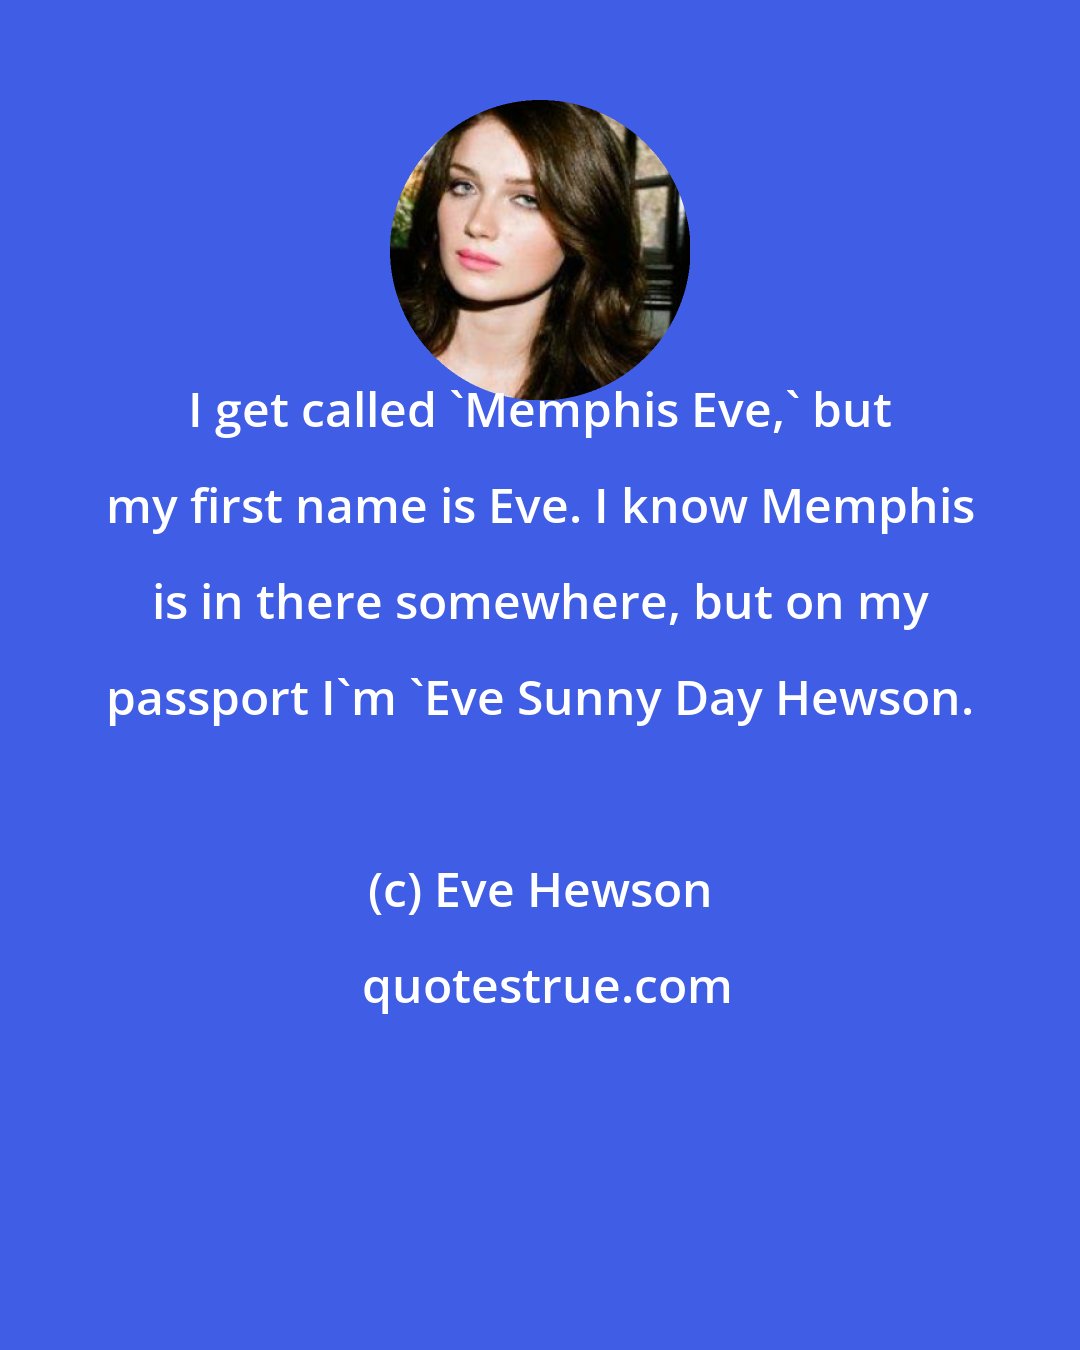 Eve Hewson: I get called 'Memphis Eve,' but my first name is Eve. I know Memphis is in there somewhere, but on my passport I'm 'Eve Sunny Day Hewson.